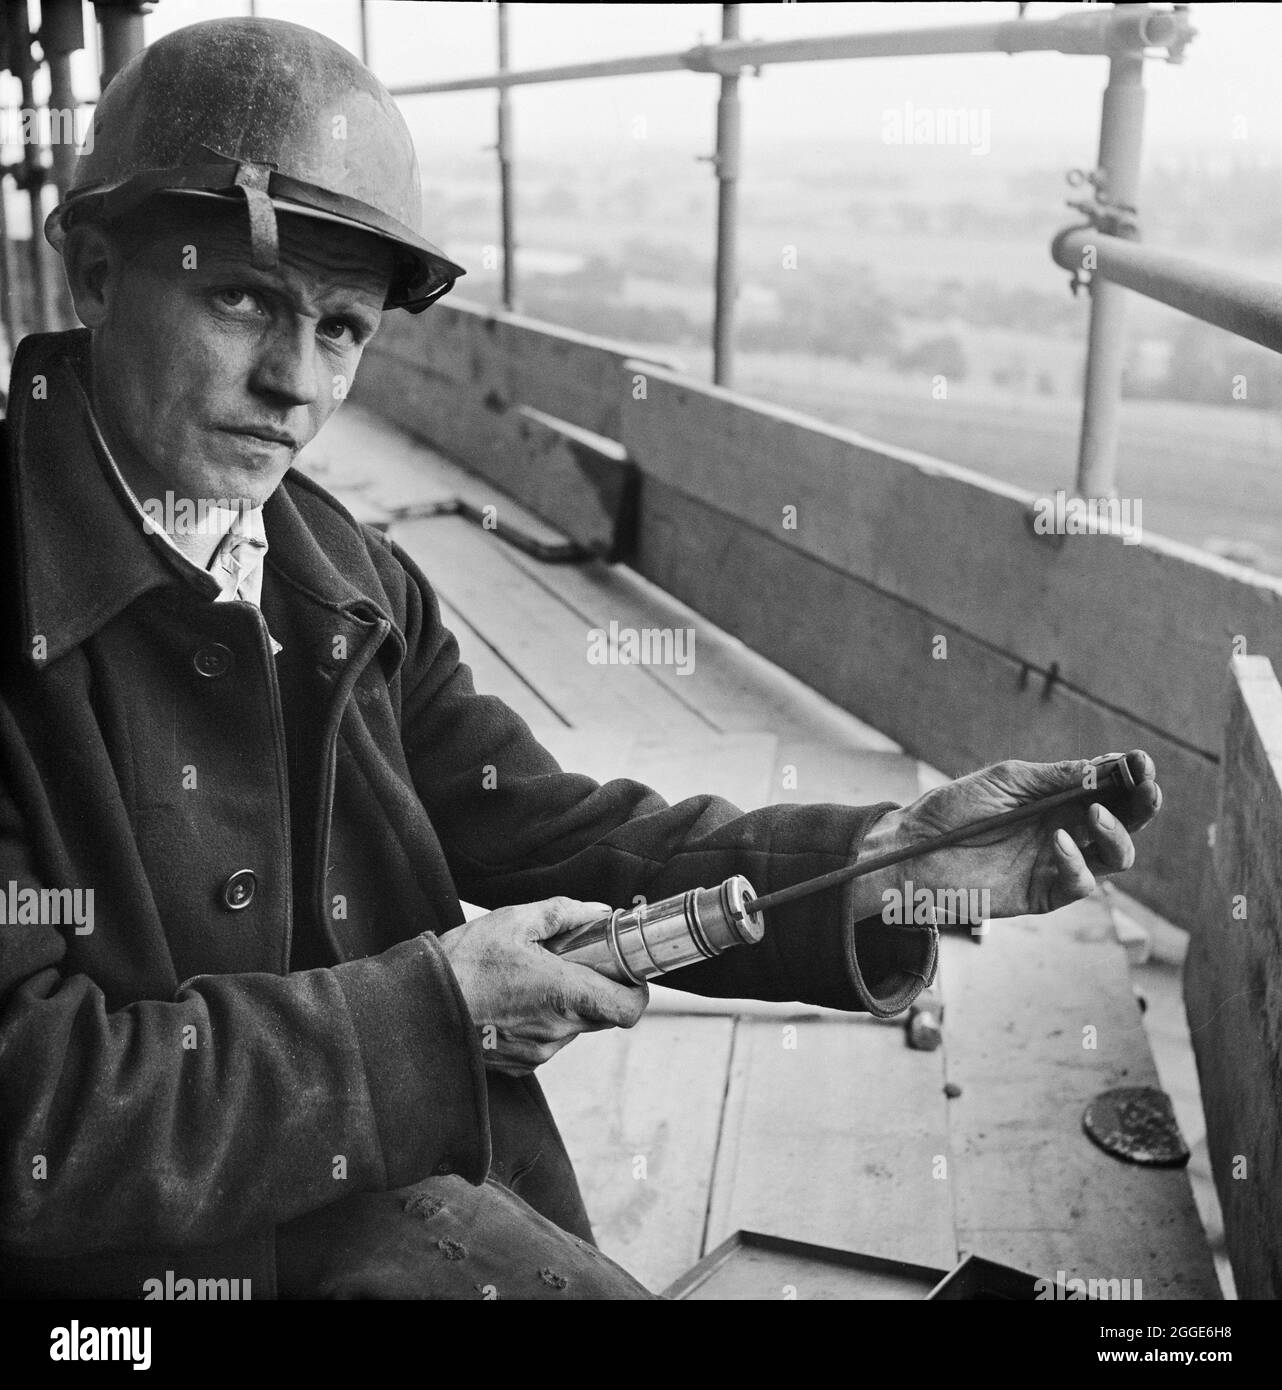 A worker loading a riveting gun during the construction of two sugar silos at Poppleton Sugar Beet Factory. Two sugar silos were built by Laing for the British Sugar Corporation Limited at the Poppleton Sugar Beet Factory. They were designed to hold a total of 16,000 tons of sugar and were the largest to have been built in the country when this photograph was taken. The prestressed post-tensioned concrete silos were made with sliding formwork using hydraulic climbing jacks. Stock Photo